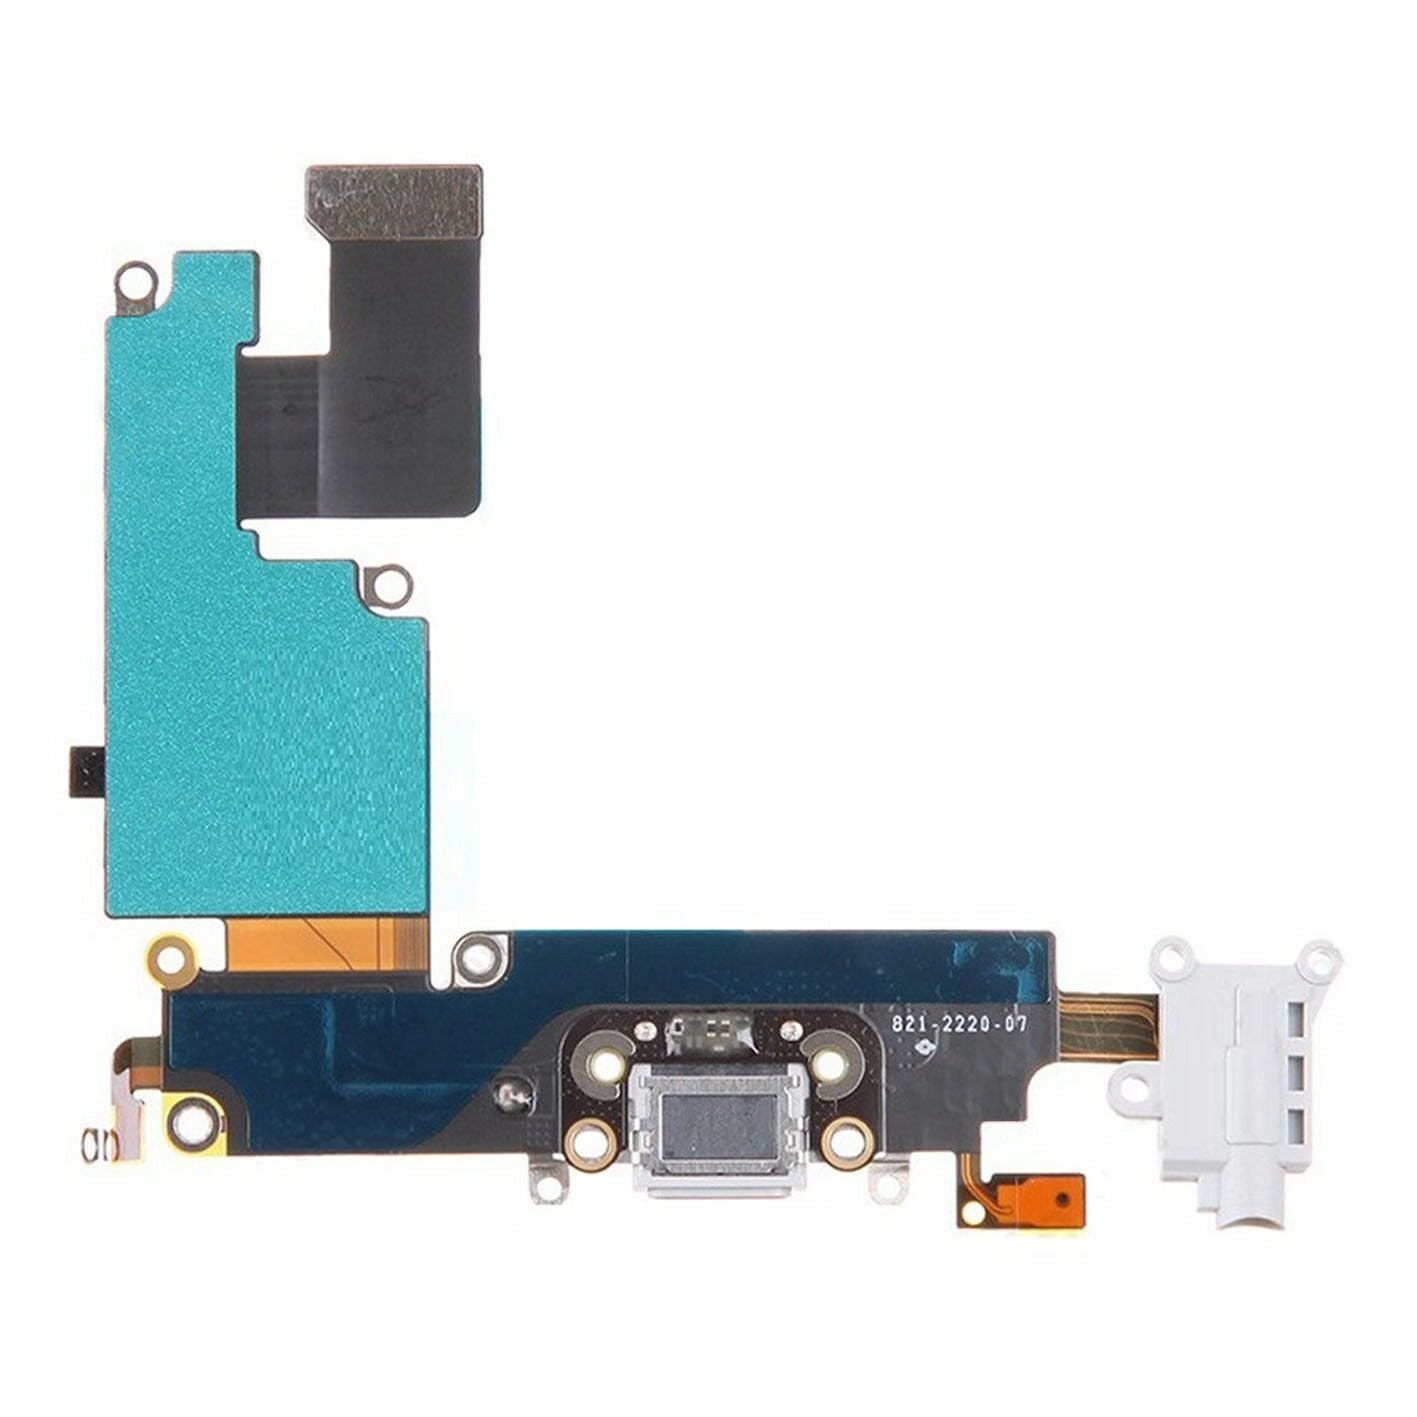 Apple iPhone 6 Plus Charging Port Flex Cable - White for [product_price] - First Help Tech